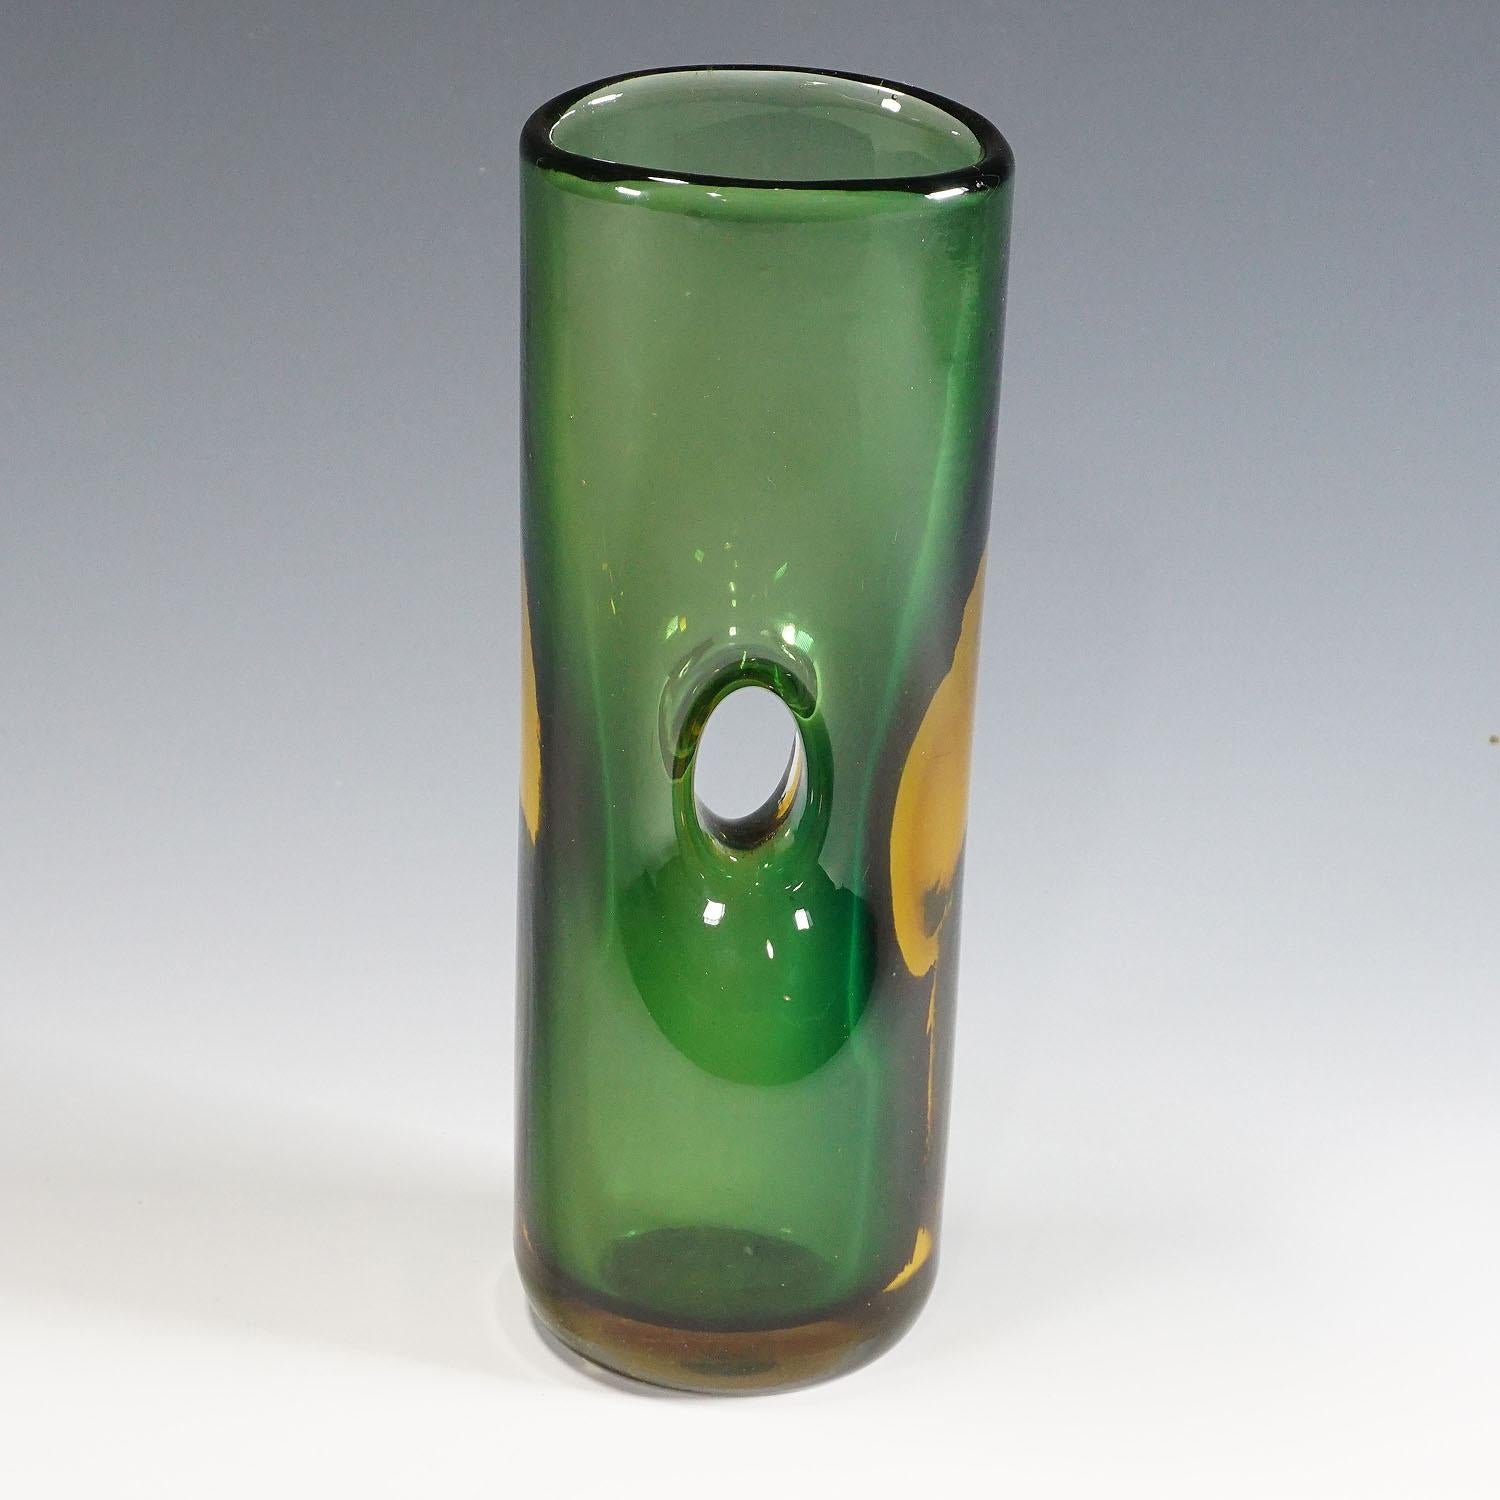 Tan France Auction Pick

A Forato vase in green, and amber colored glass designed by Fulvio Bianconi in 1951, manufactured by Venini, Venice, Italy ca. 1950s. The artglass is with etched signature 'venini murano italia' on the base. There are traces